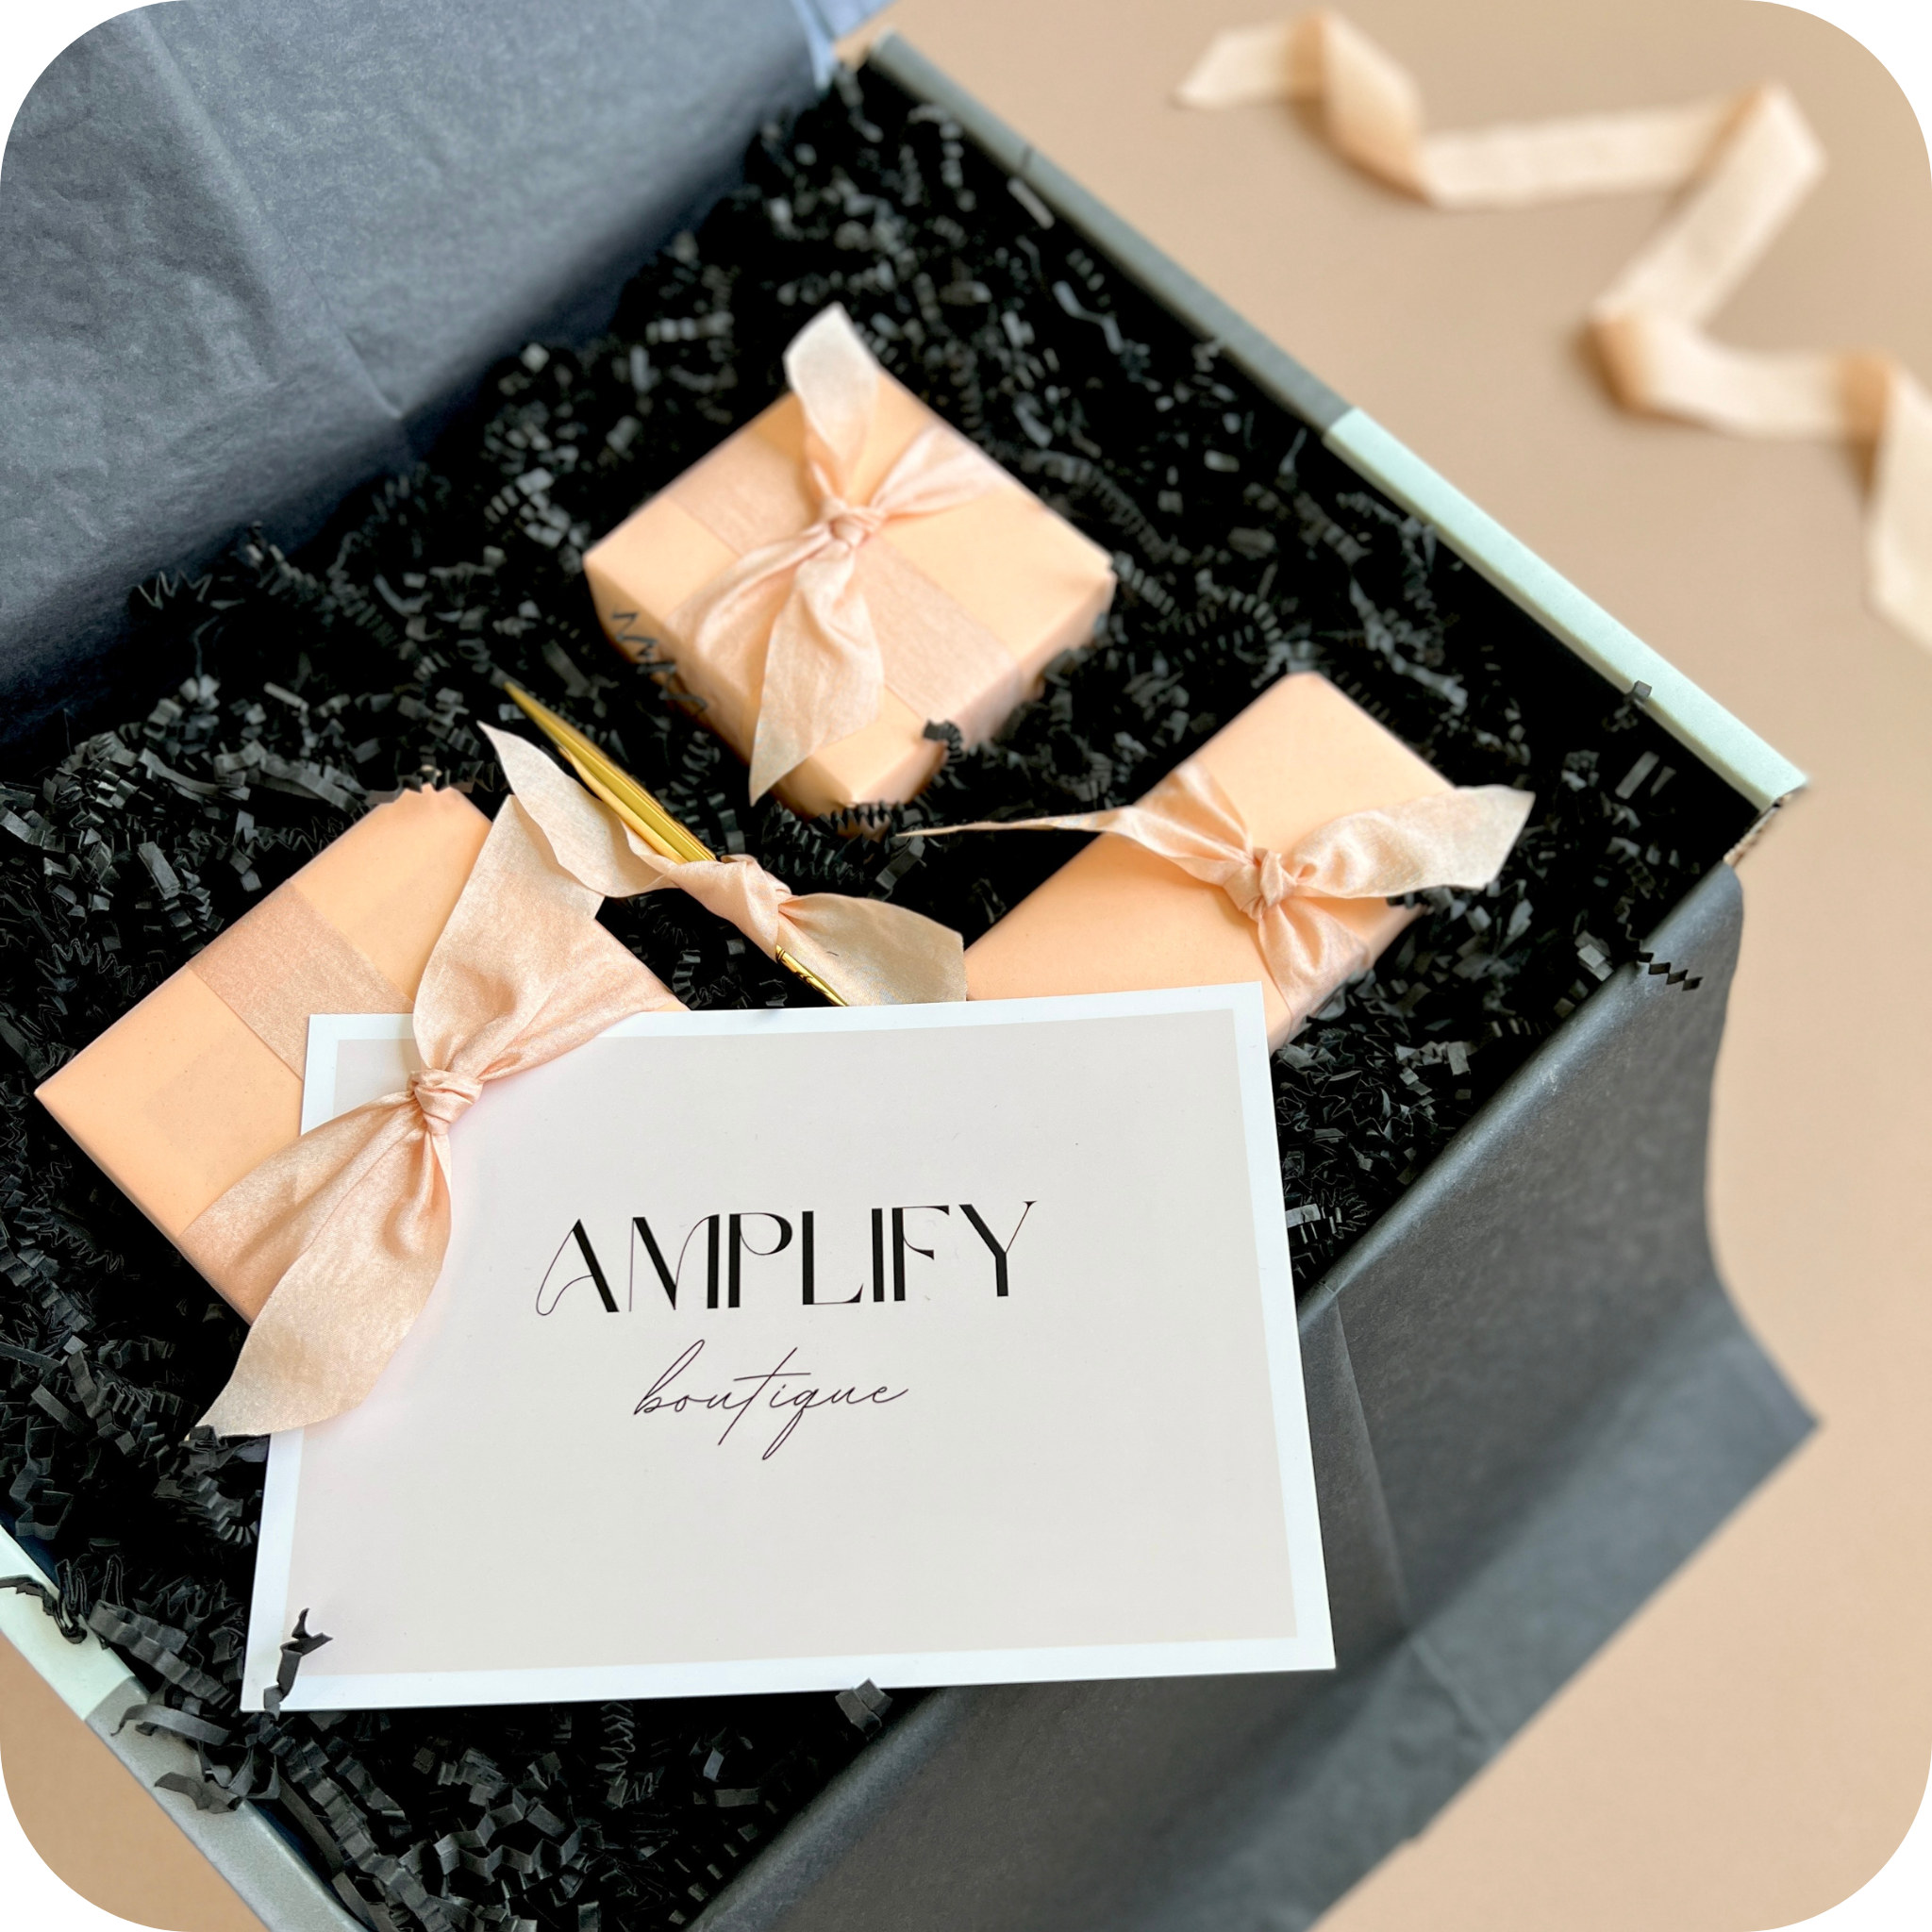 Bocu Hand Wrapped Gift Boxes - We offer semi and fully custom gifting services to take your client and employee experience to the next level.